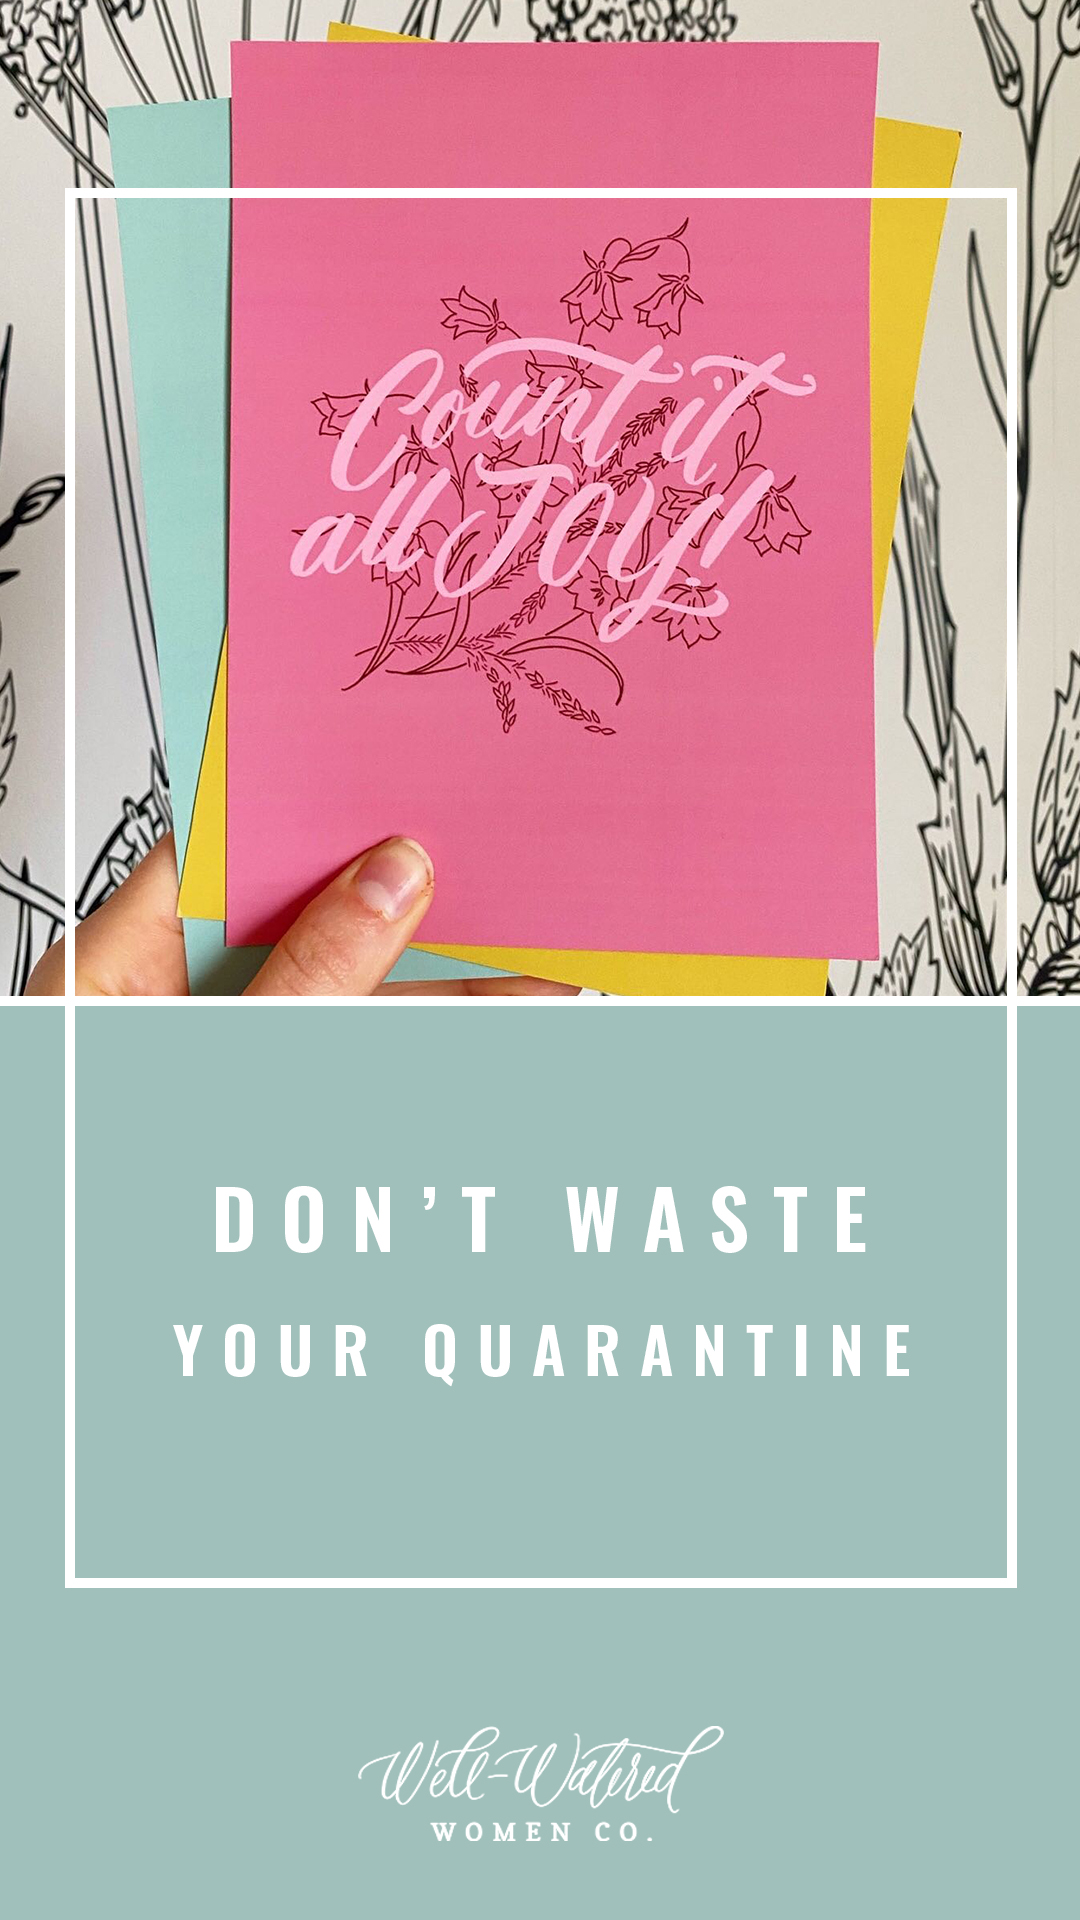 Well Watered Women Blog-Don't Waste Your Quarantine